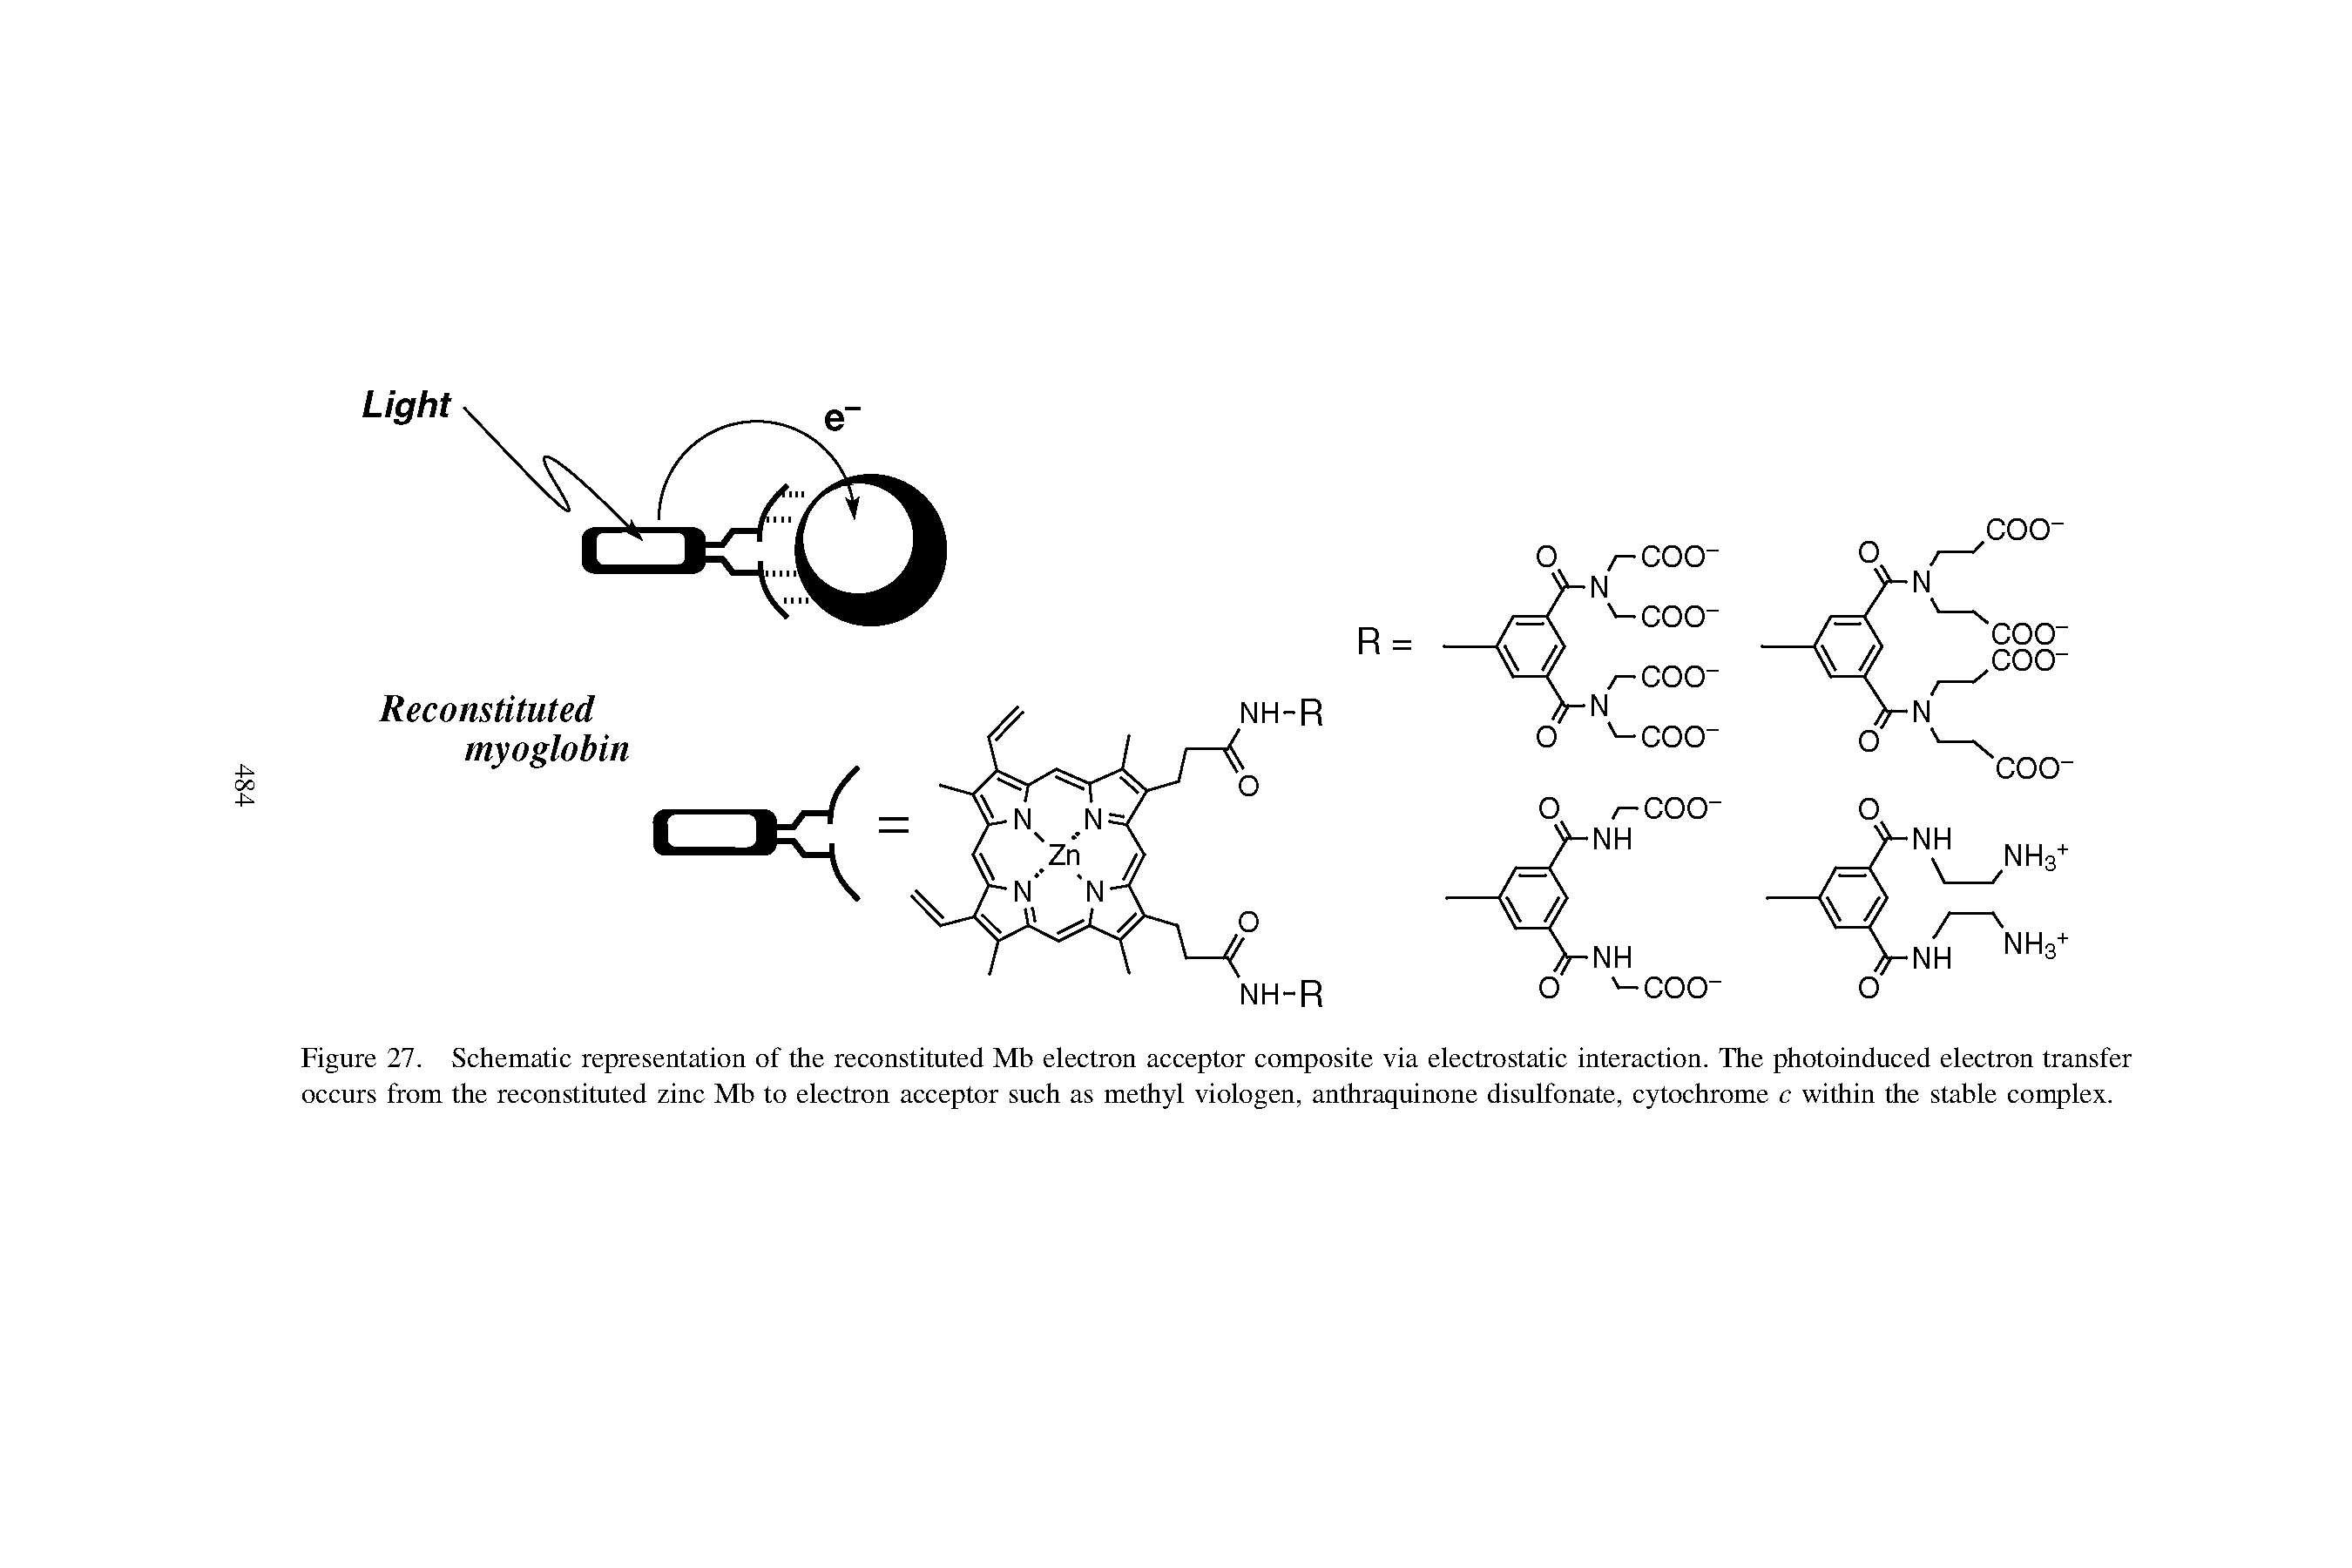 Figure 27. Schematic representation of the reconstituted Mb electron acceptor composite via electrostatic interaction. The photoinduced electron transfer occurs from the reconstituted zinc Mb to electron acceptor such as methyl viologen, anthraquinone disulfonate, cytochrome c within the stable complex.